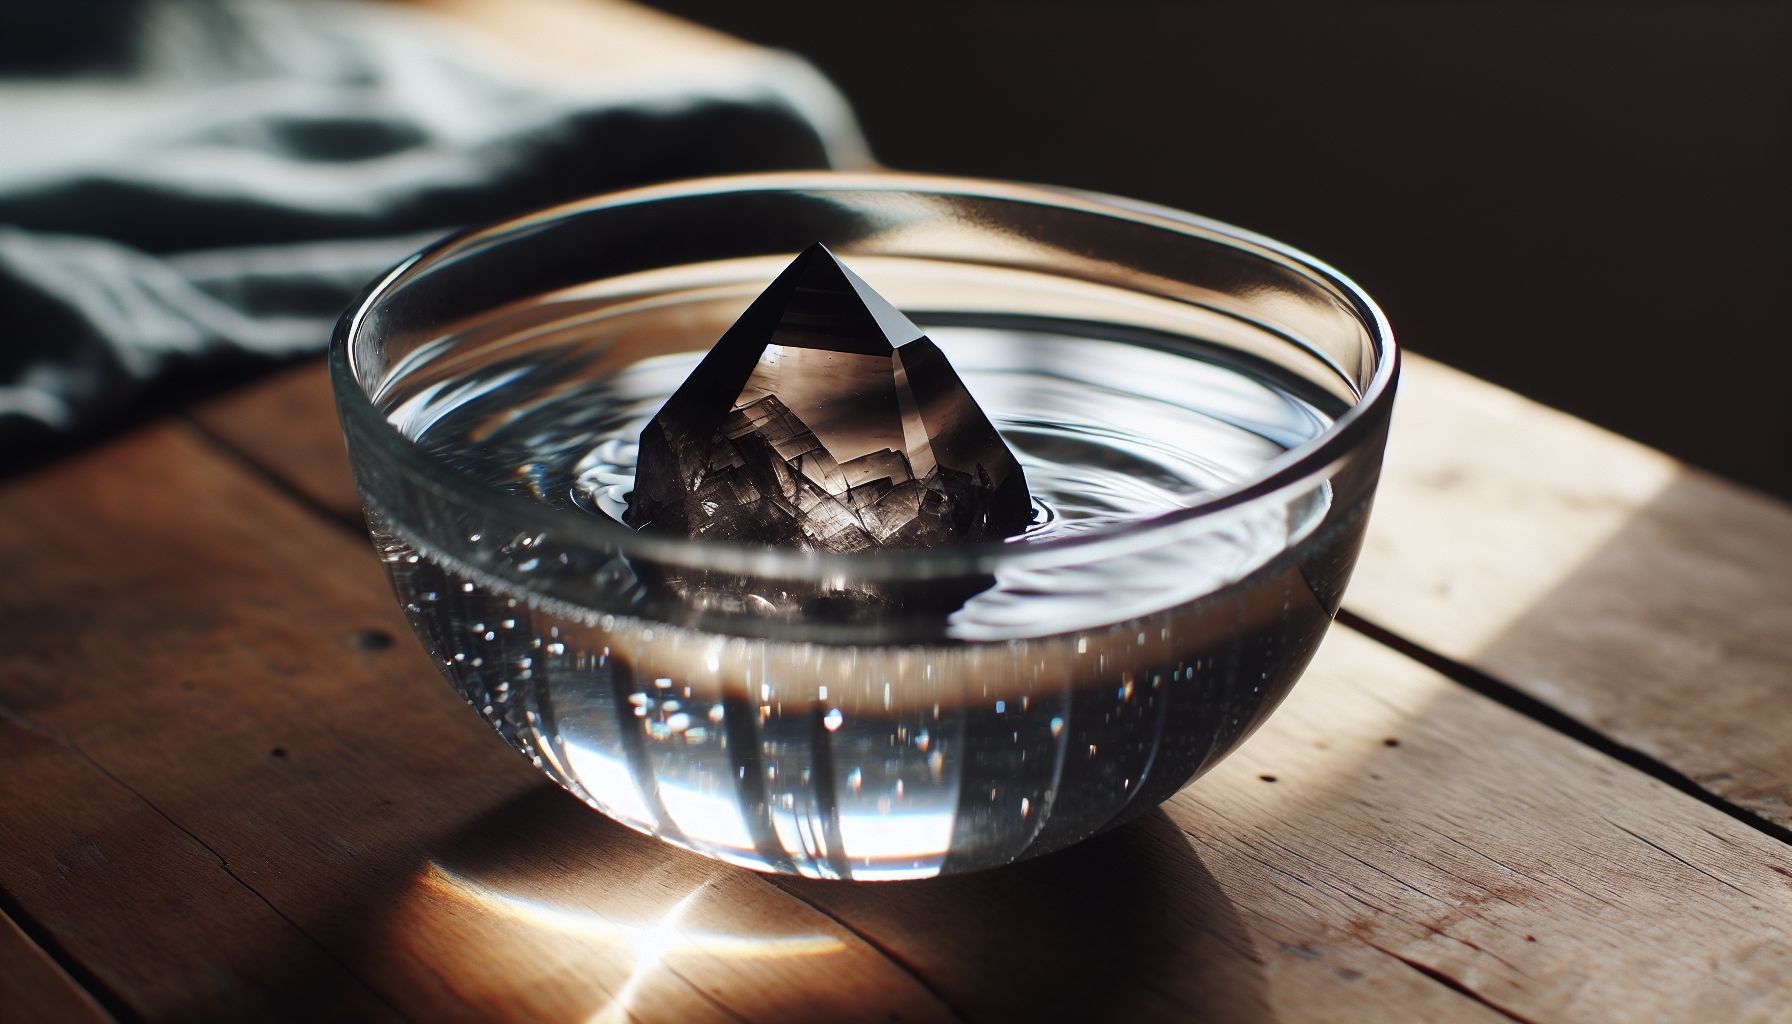 Smoky quartz crystal submerged in water